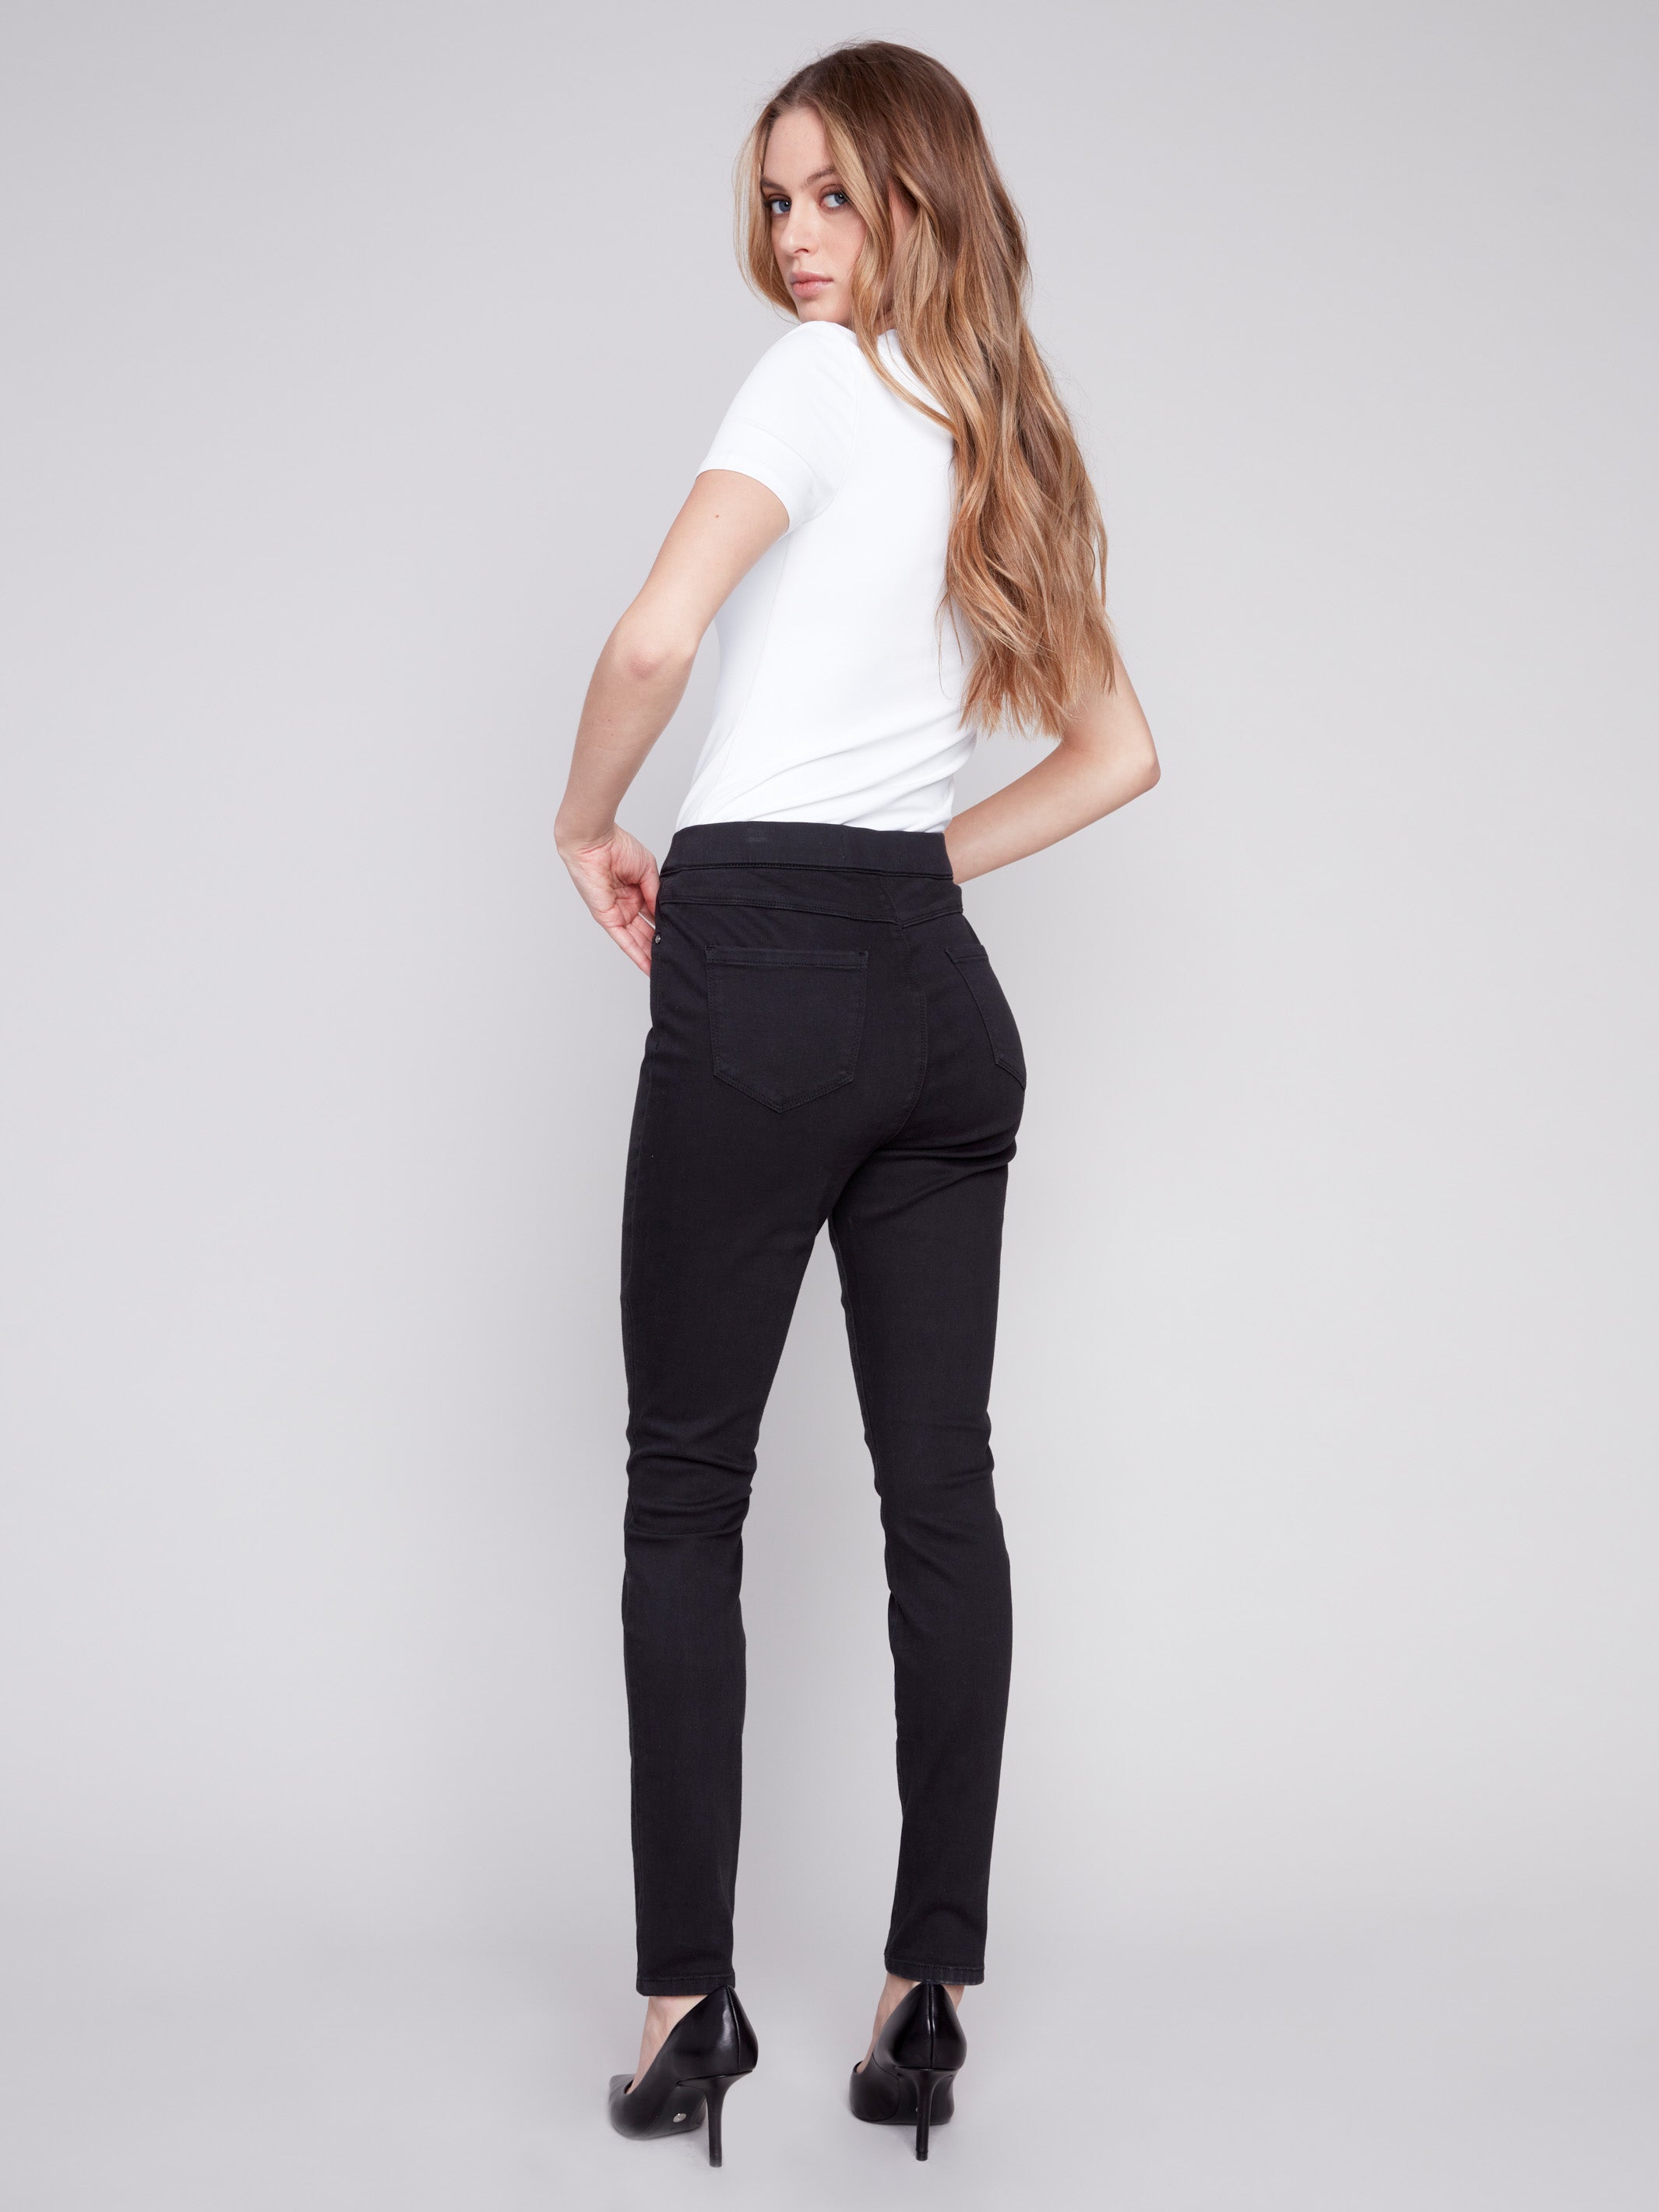 Twill Pull-On Pants - Black - Charlie B Collection Canada - Image 2